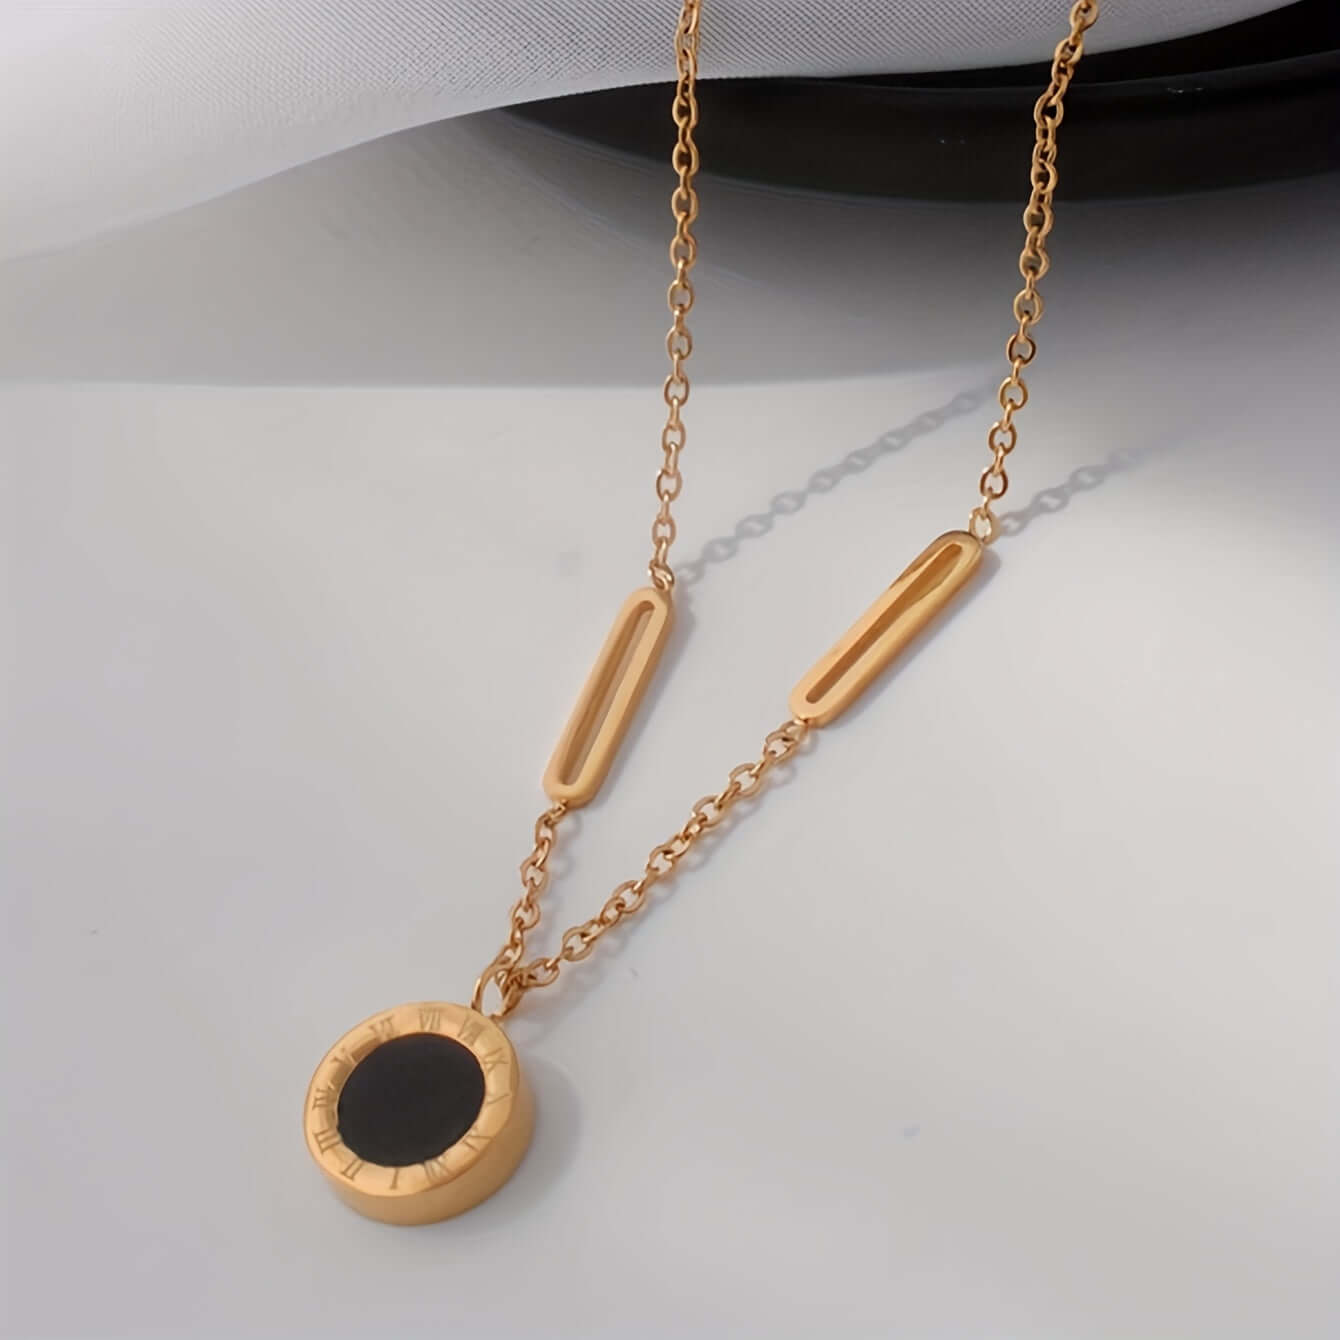 18K Gold Plated Double-sided Stainless Steel Roman Numeral Pendant Necklace | GreenLifeHuman Emporium